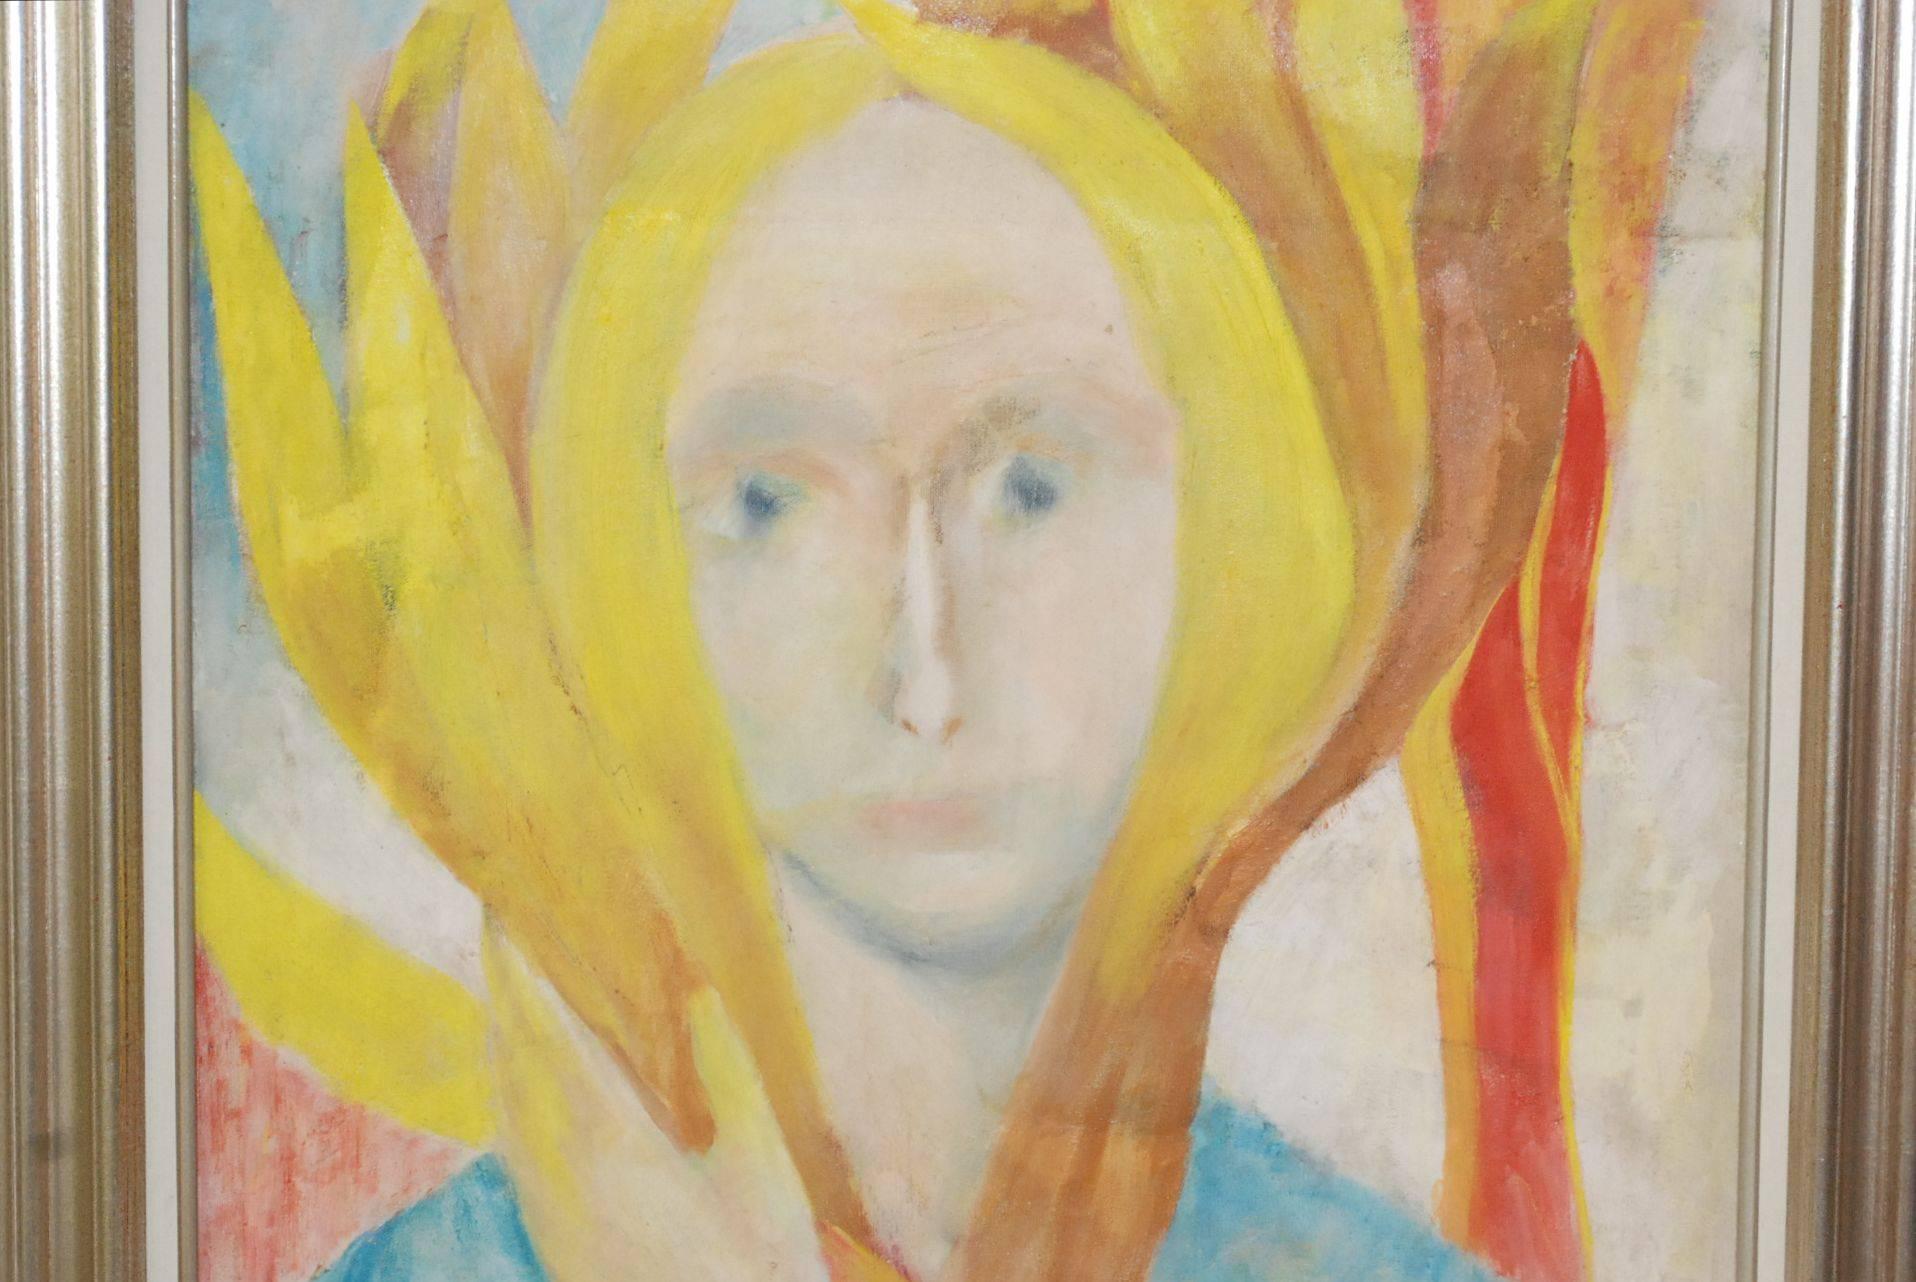 1960s oil on canvas painting of woman portrait signed by Louis Wolchonok. (American/New York 1893-1973) Please note: One small repair see details pictures. Louis Wolchonok studied at National Academy of Design, Cooper Union Art School, City College